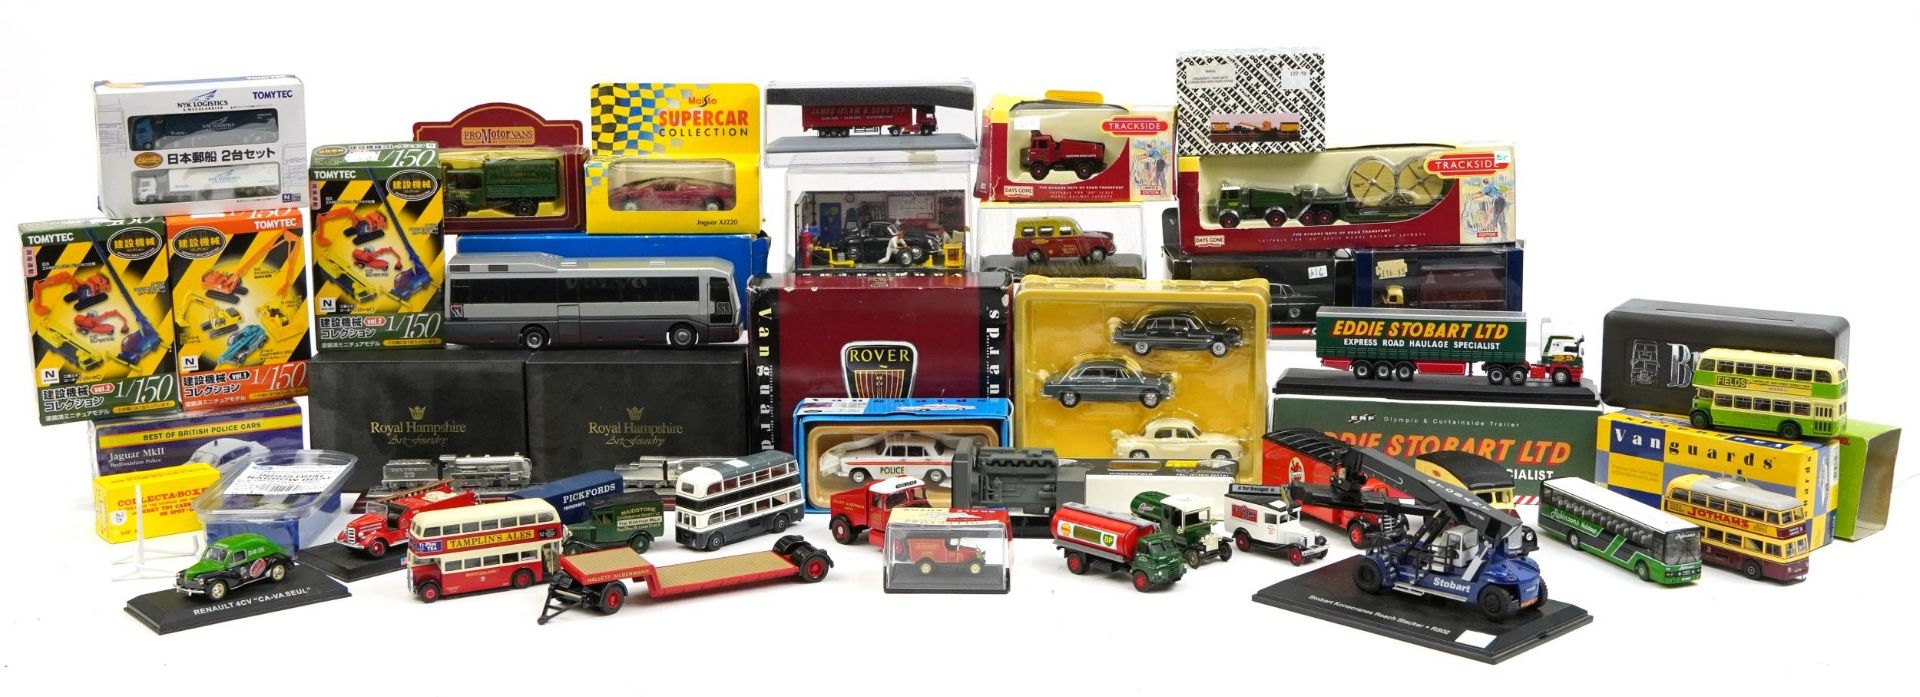 Large collection of Corgi diecast collector's advertising vehicles including Vanguards, Royal